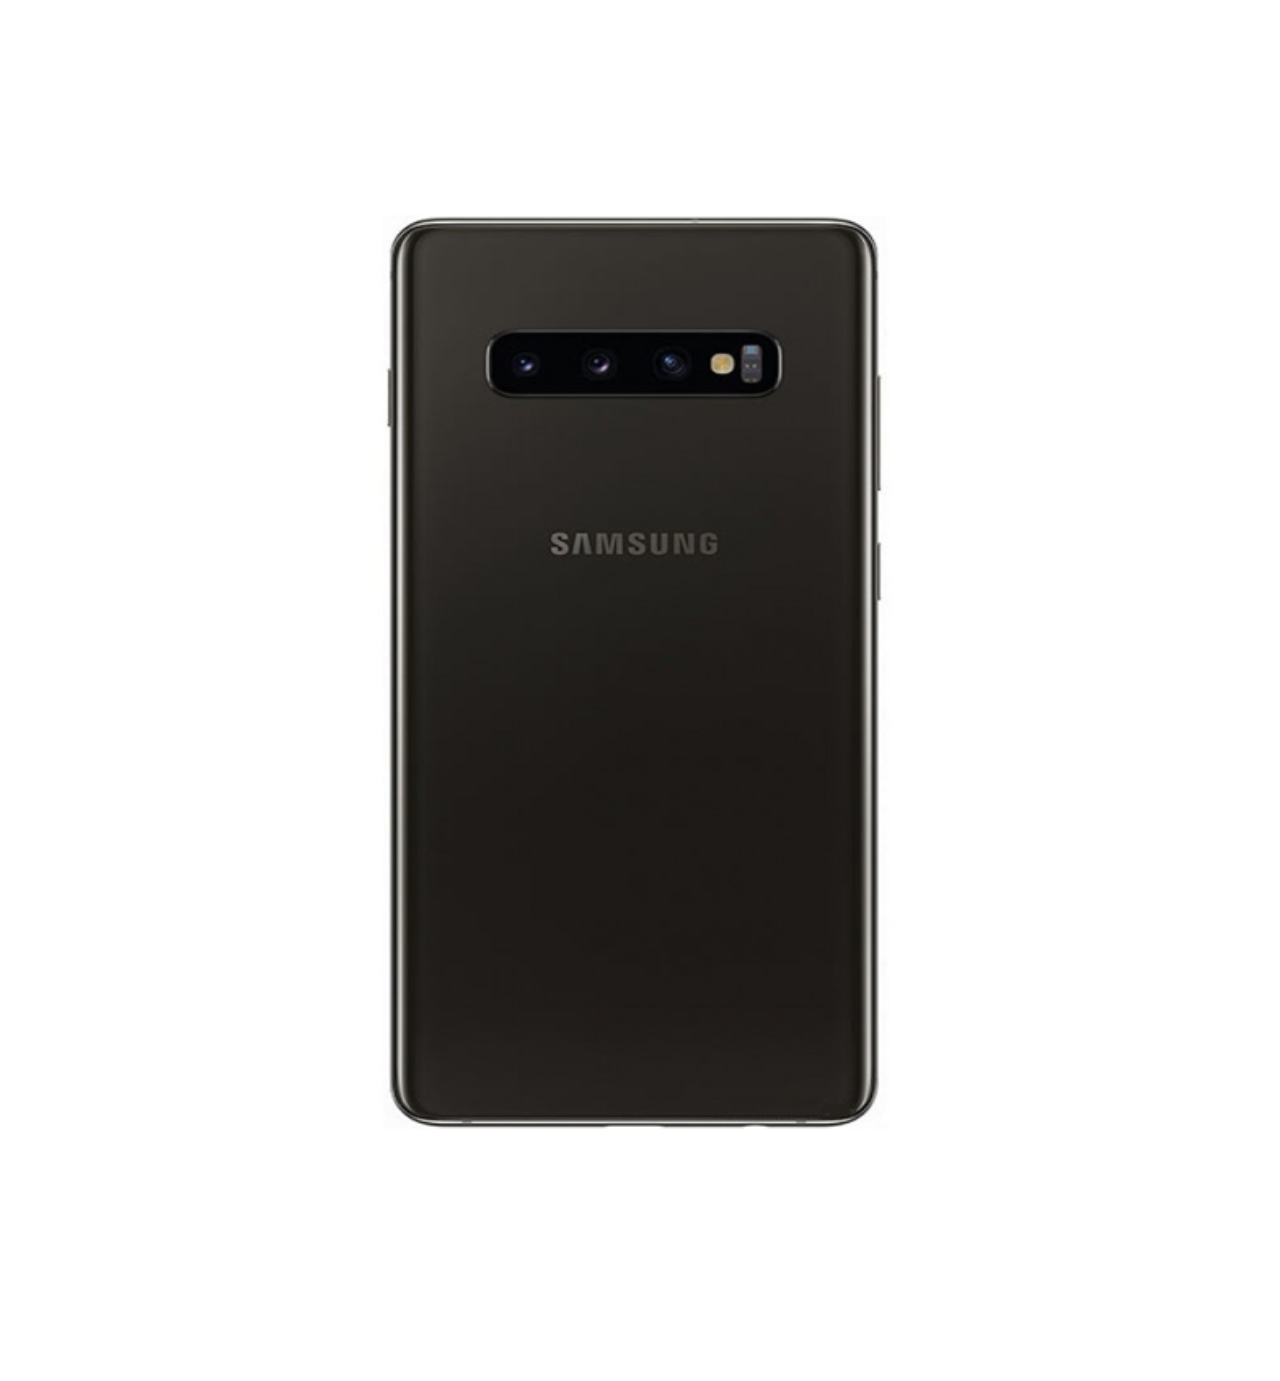 Samsung Galaxy S10 Plus battery cover prism black GH82 18406 A